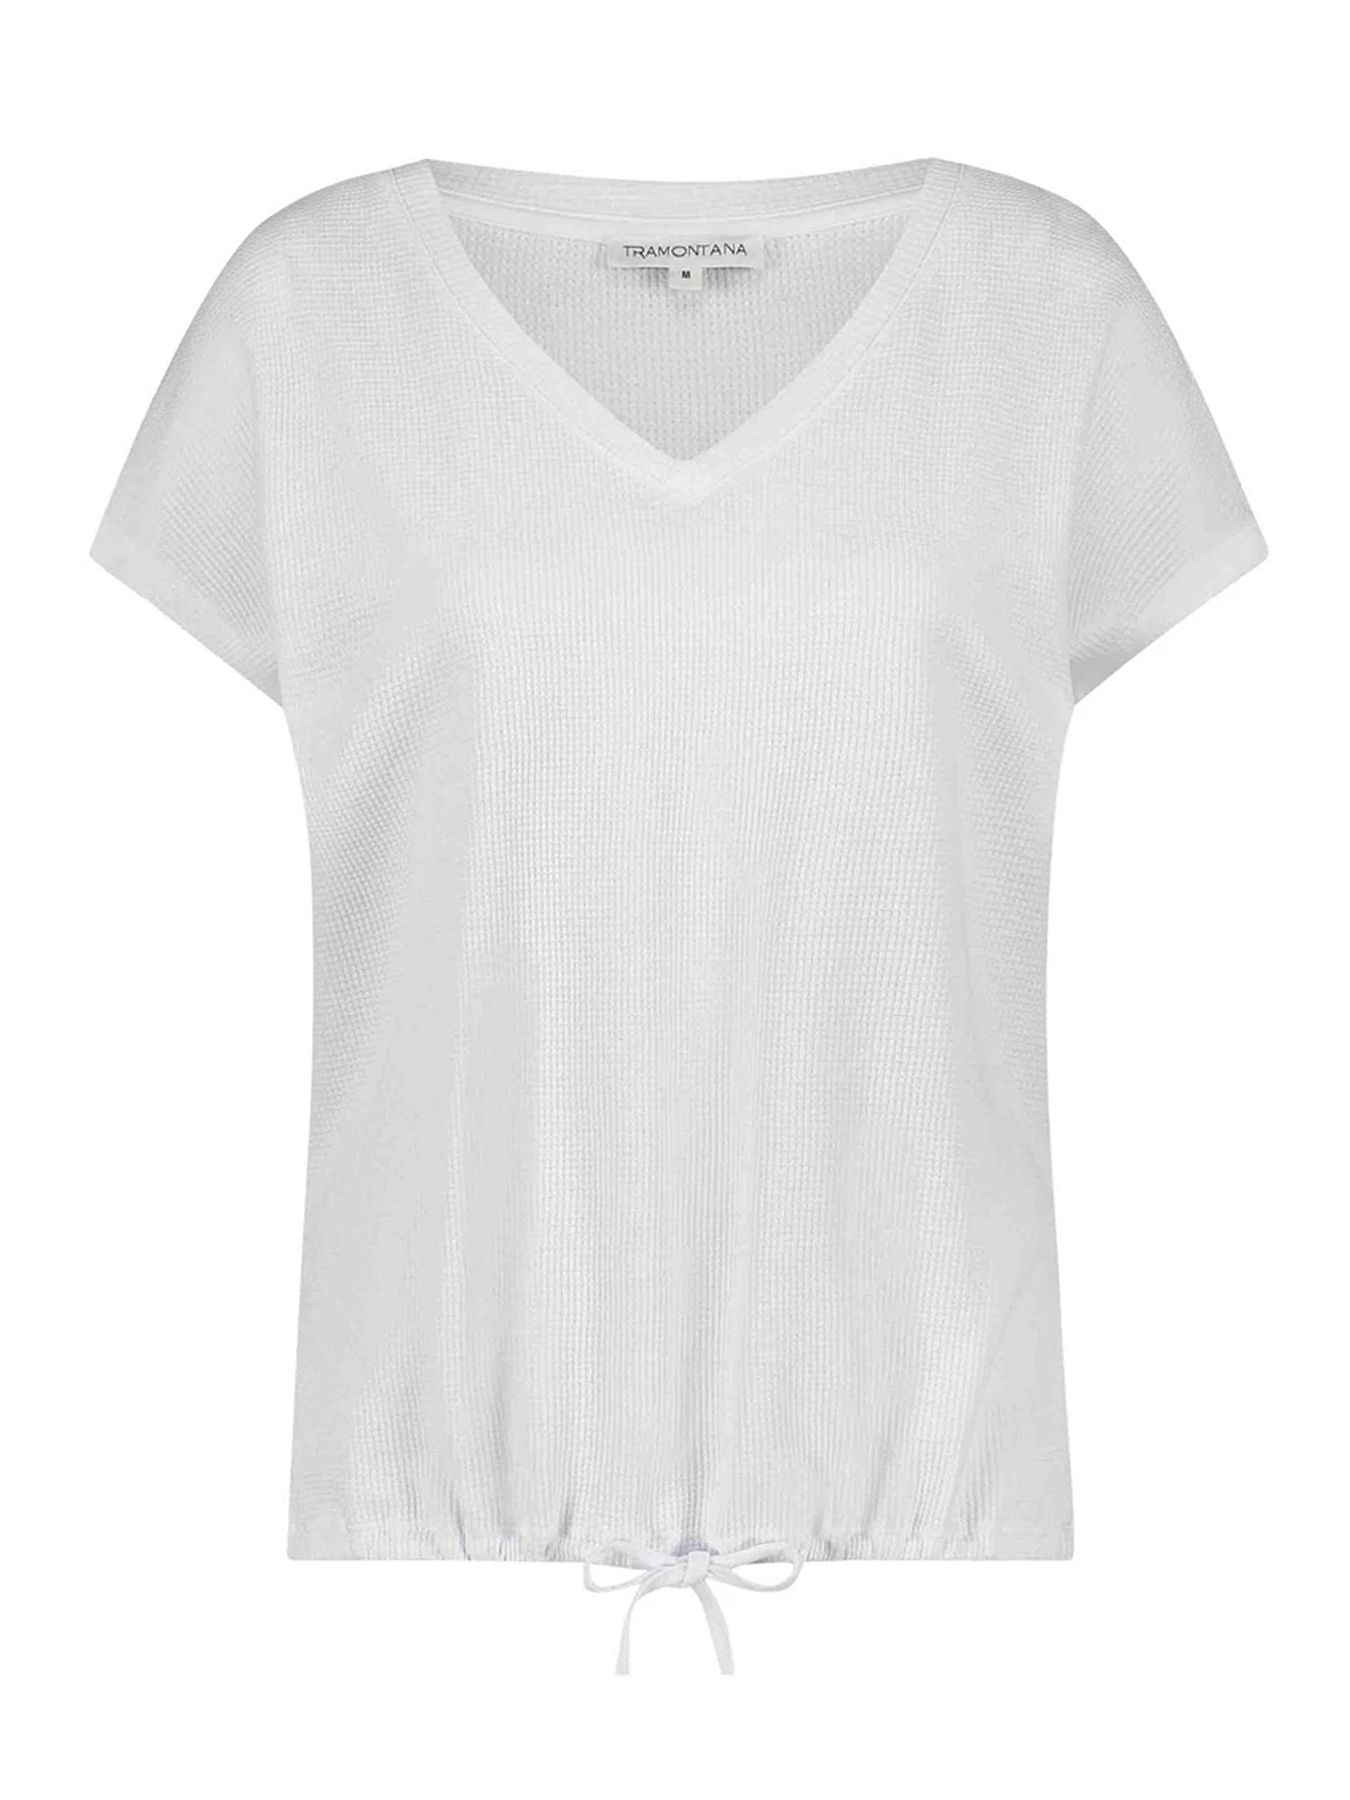 Tramontana Top S/S Structure White 001000 2900144203030